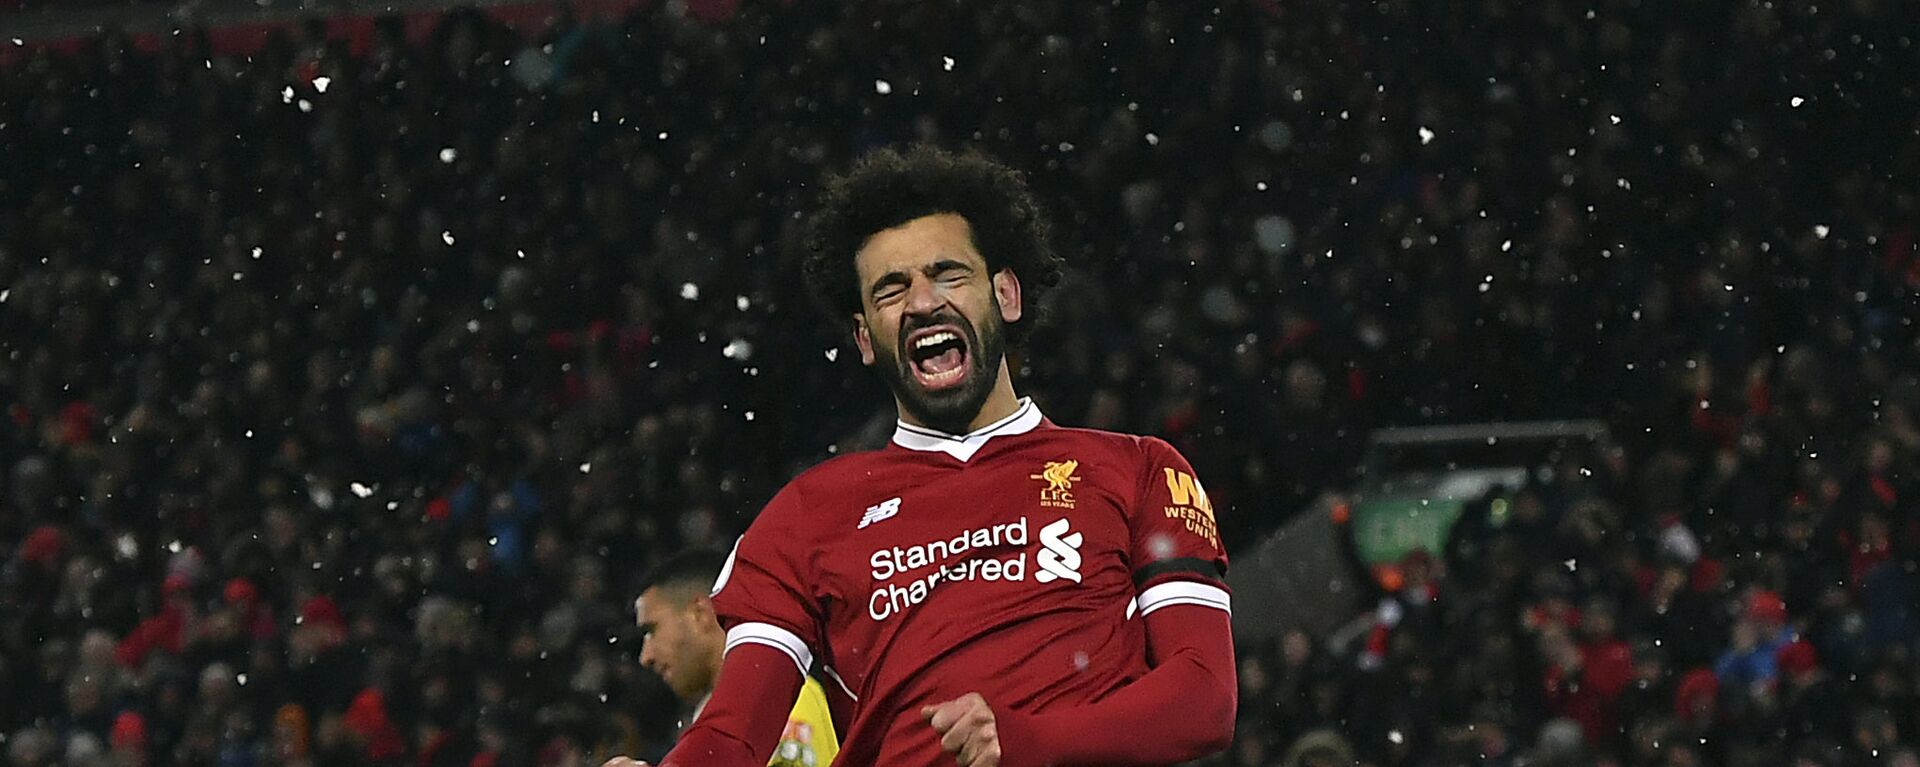 Liverpool's Mohamed Salah celebrates scoring his hat-trick during the English Premier League soccer match between Liverpool and Watford at Anfield, Liverpool, England - اسپوتنیک افغانستان  , 1920, 20.08.2021